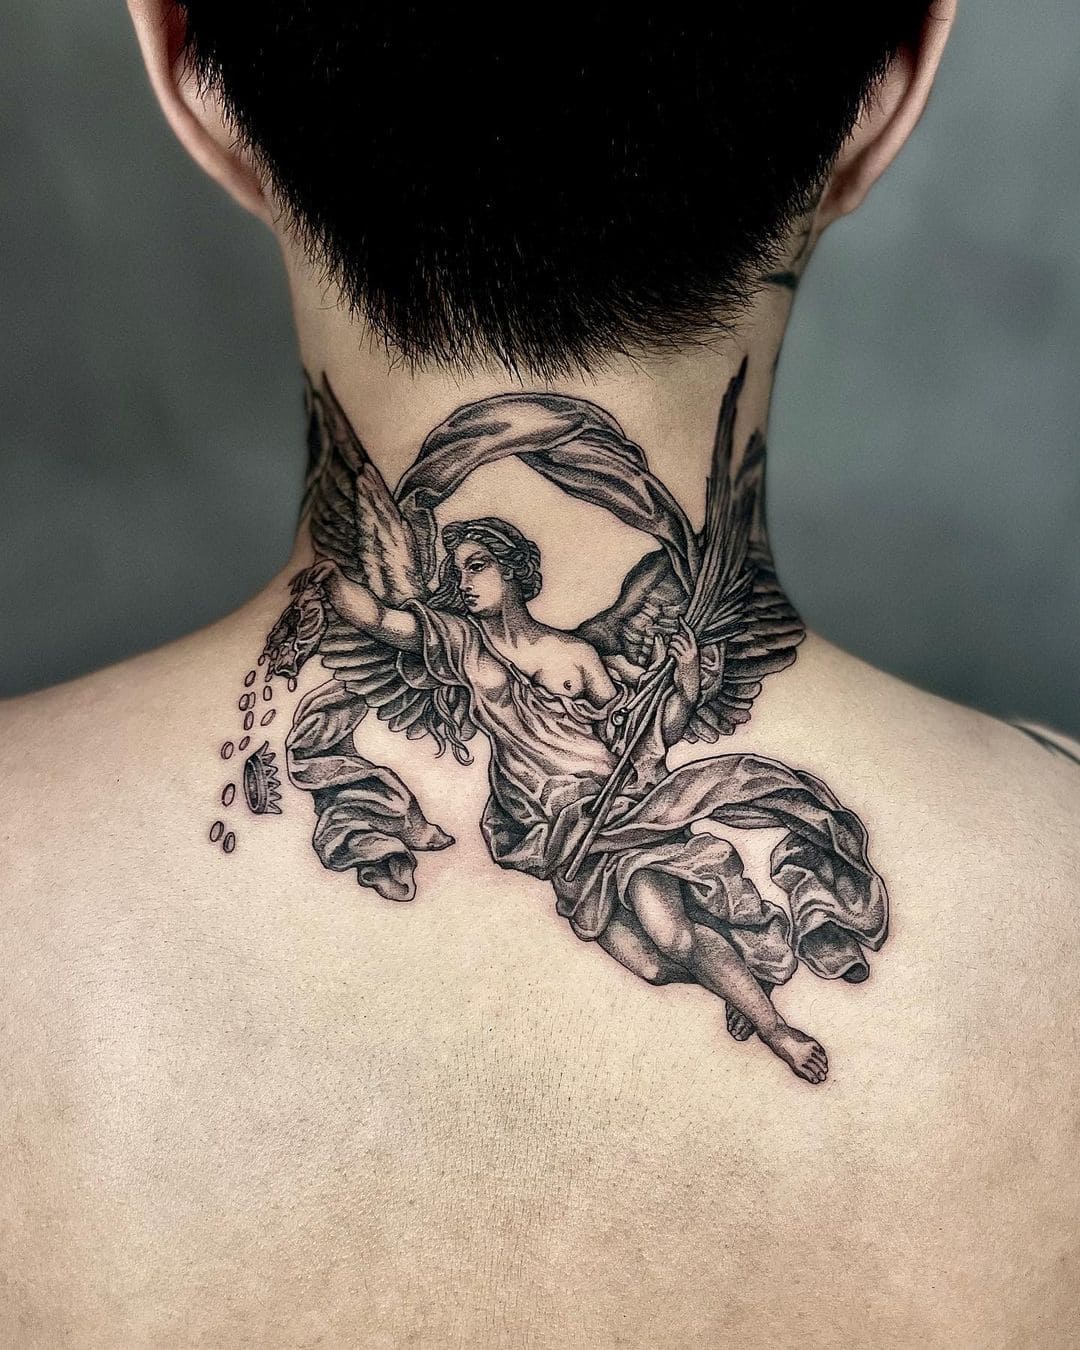 Greek mythology tattoo Archives - Visions Tattoo and Piercing